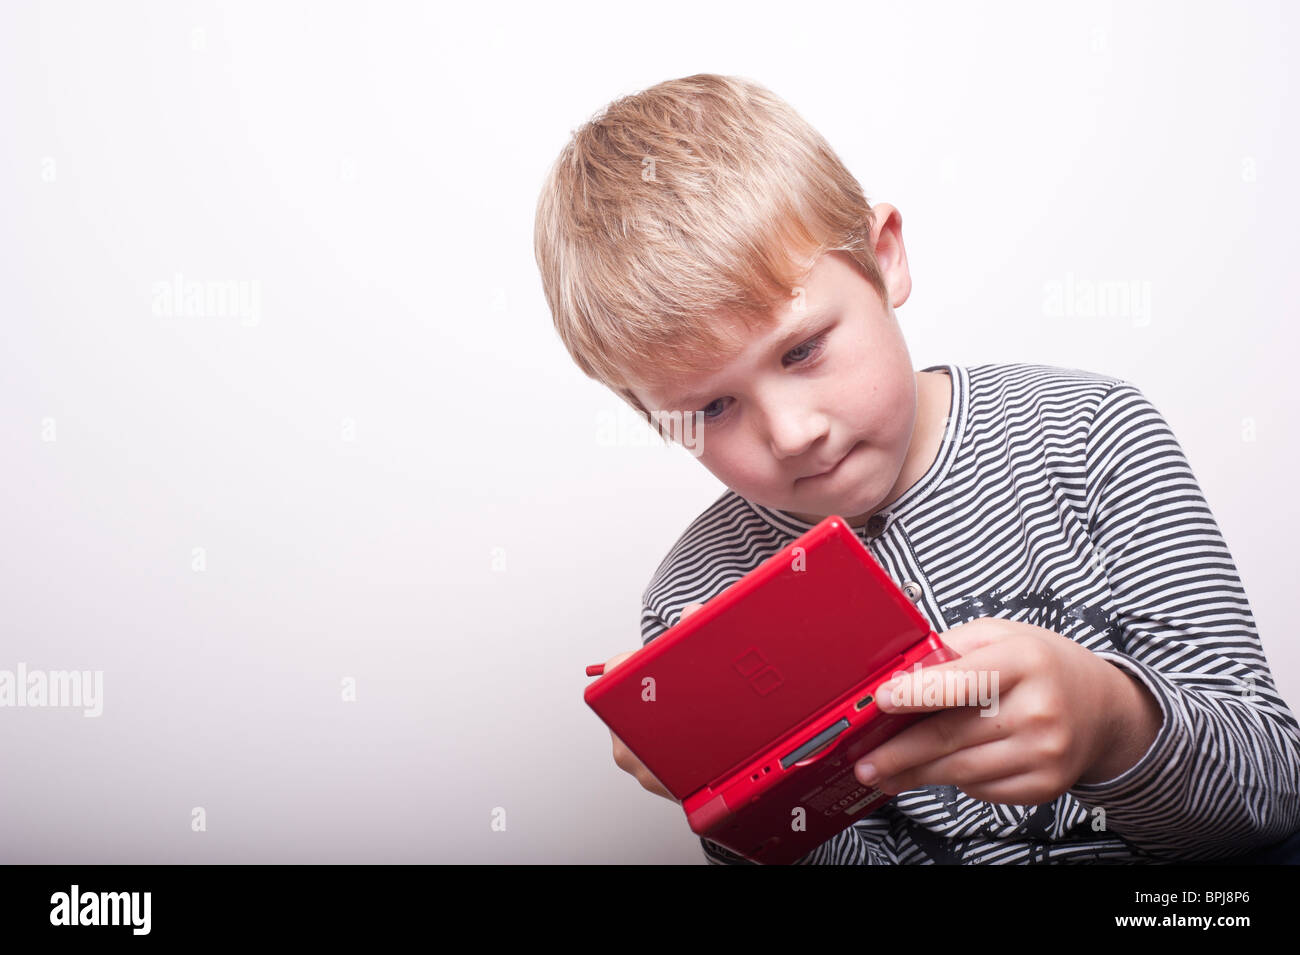 A MODEL RELEASED picture of a 6 year old boy playing with a Nintendo DS handheld games console in the studio Stock Photo